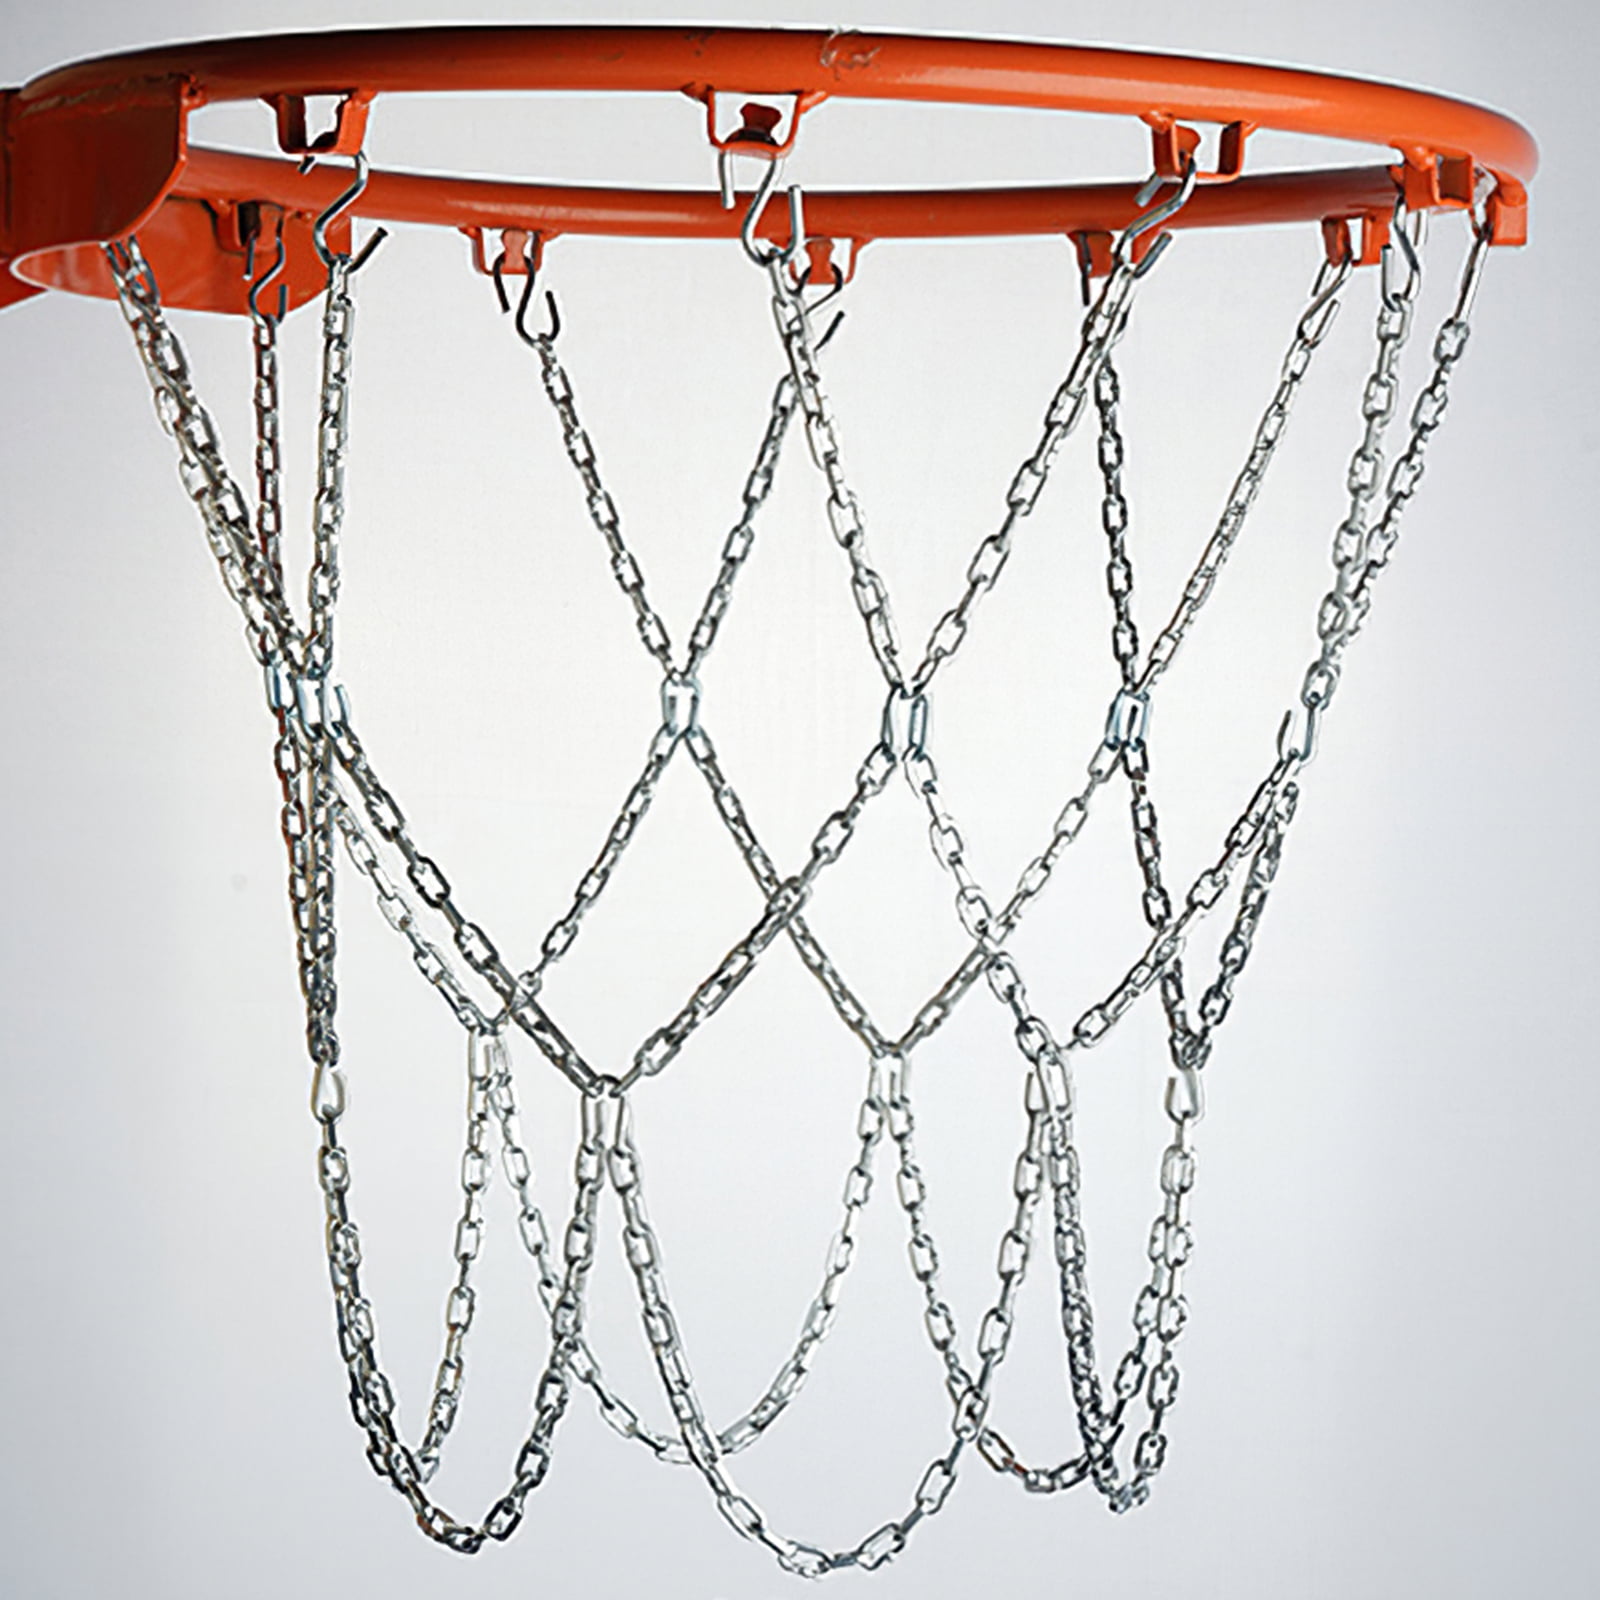 Stainless Steel Basketball Net Easy To Install Iron Net Chain High Quality  Material Rust Protection For Indoor Or Outdoor Use